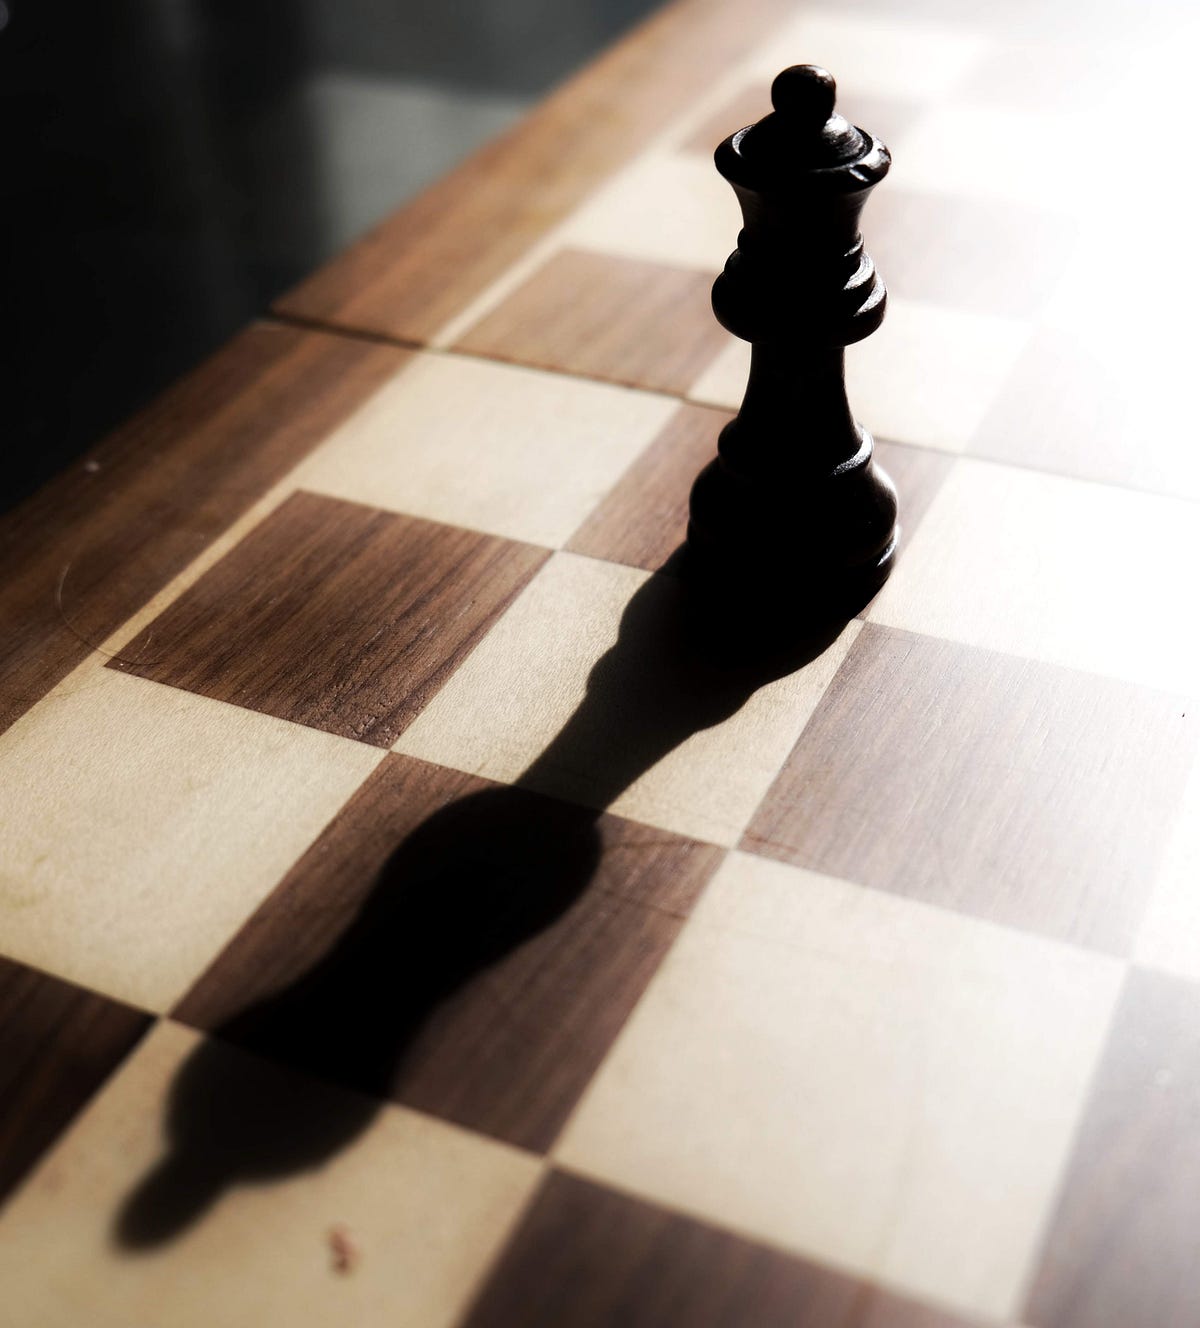 Chess Time - Multiplayer Chess - Apps on Google Play